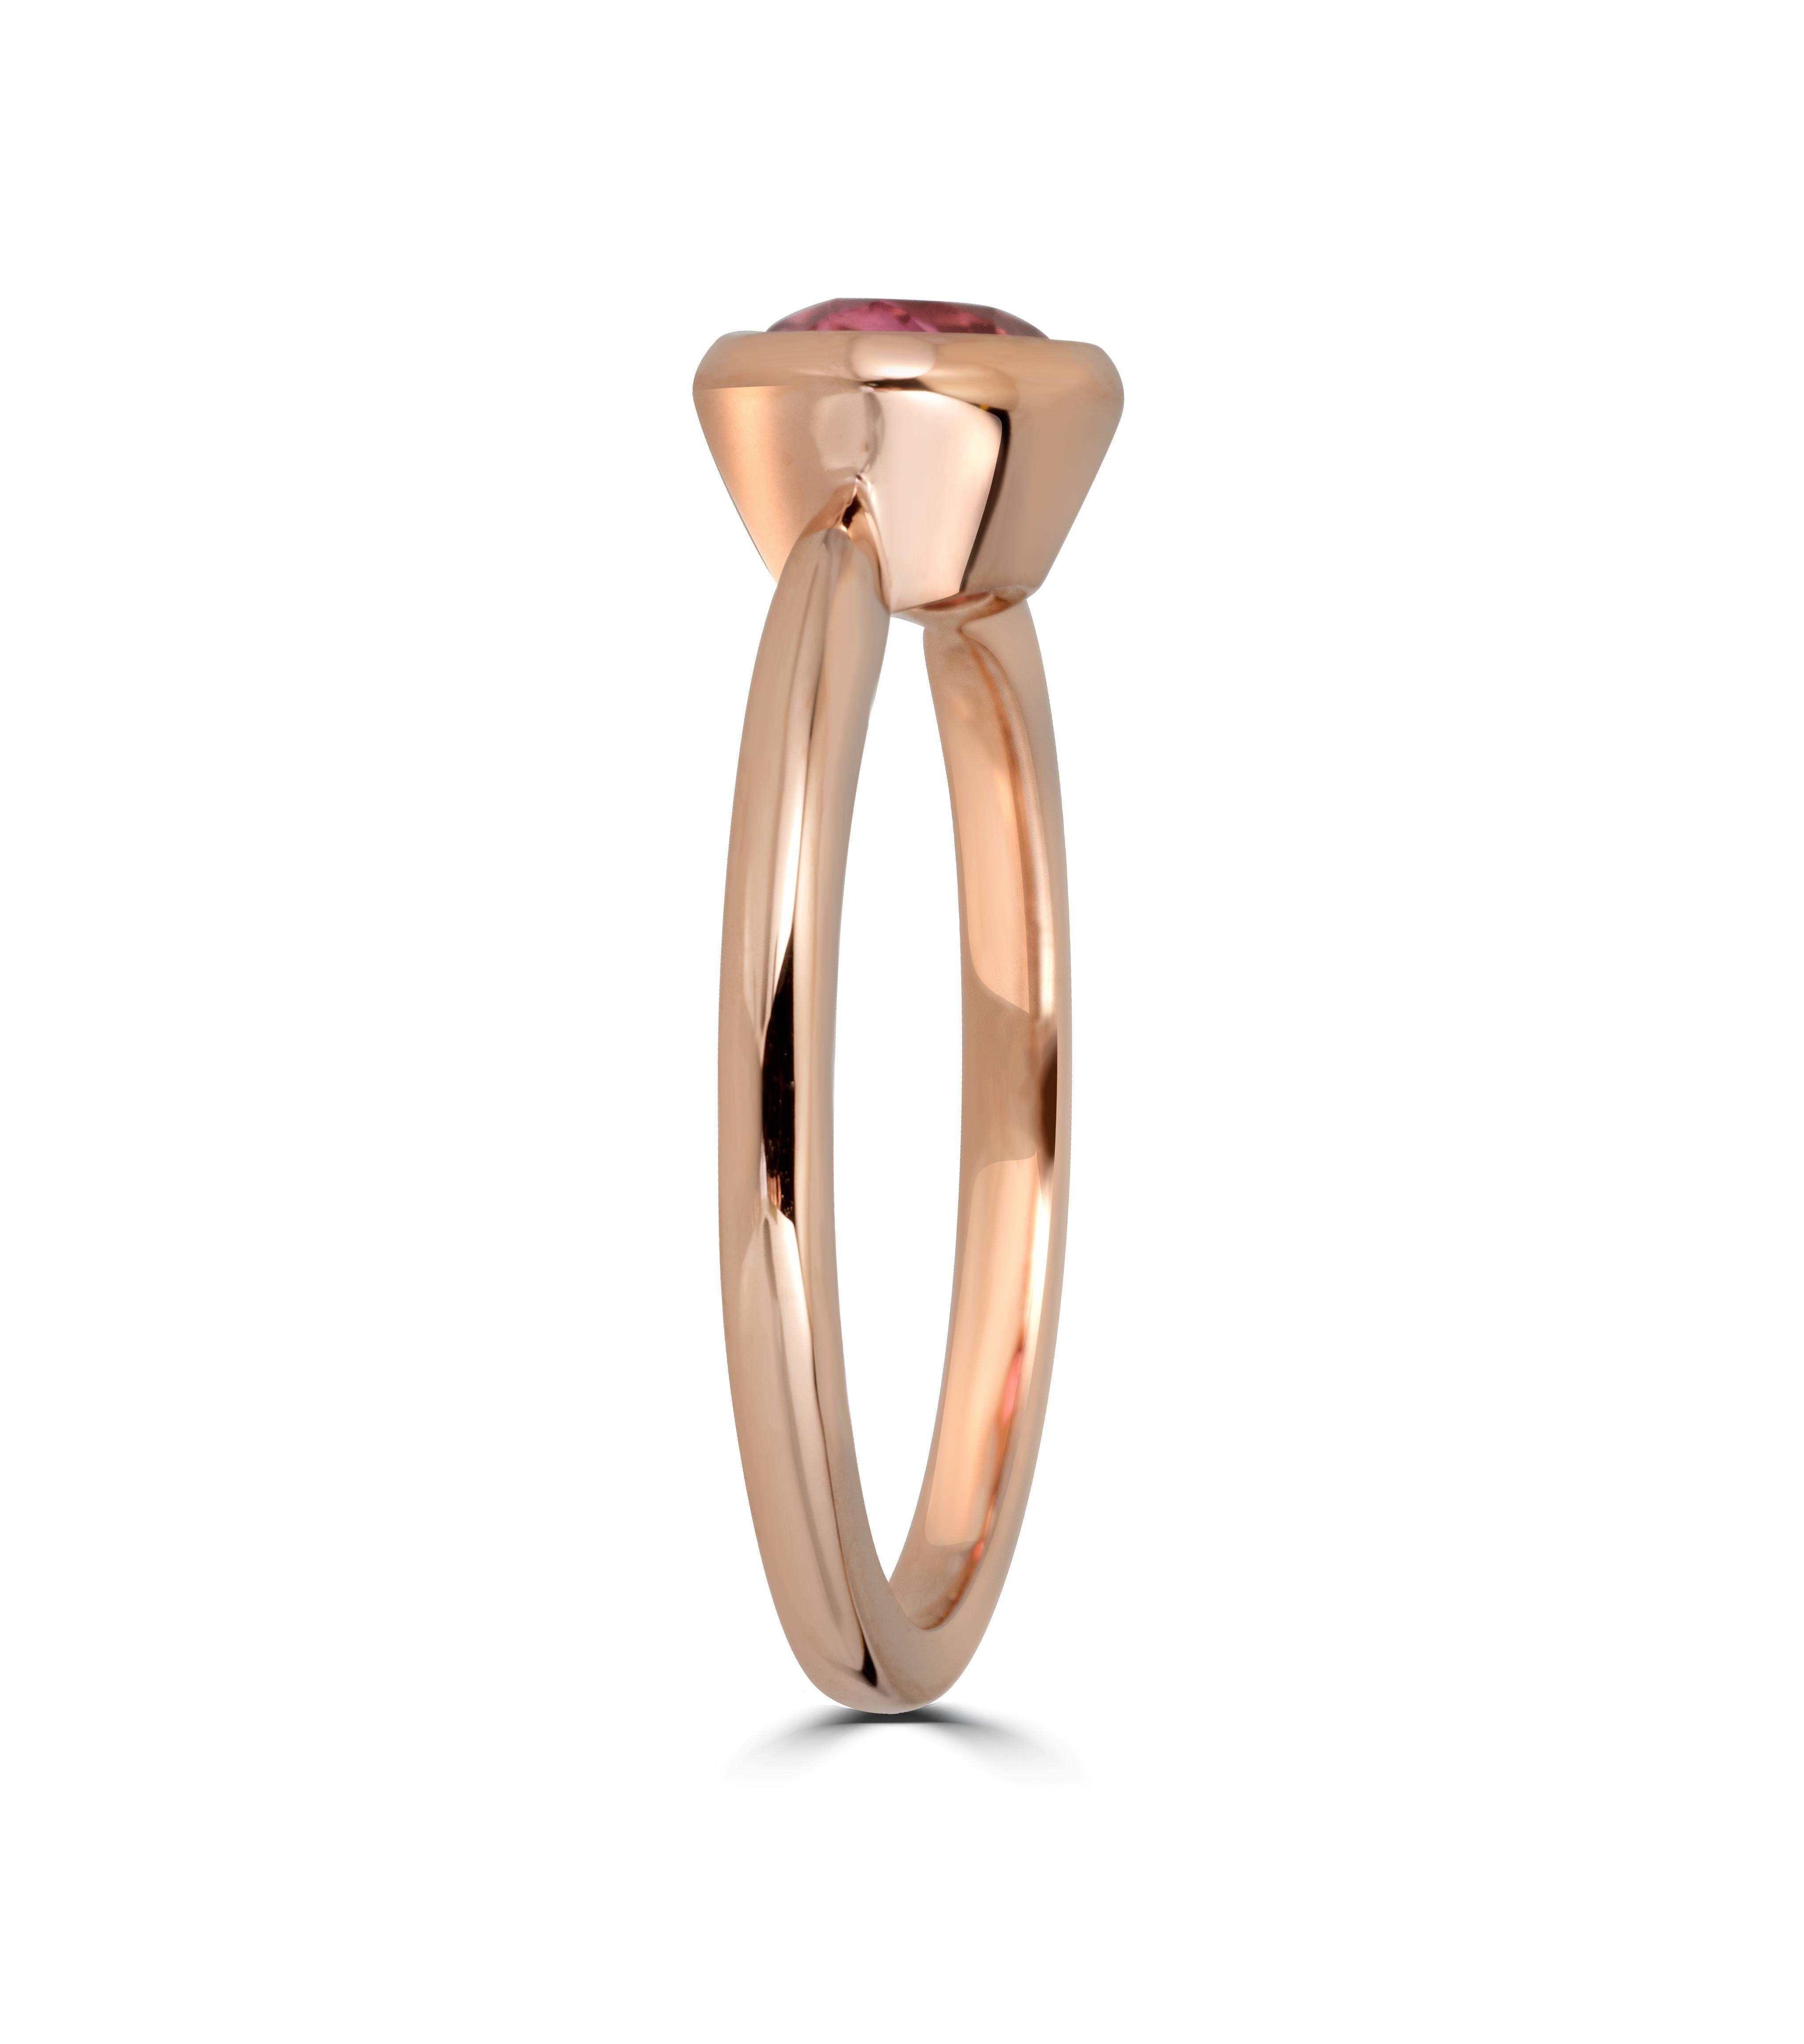 This ring features a bright pink oval tourmaline set in a East to West Horizontal bezel setting to create a decidedly modern and fresh aesthetic.

Perfect to be worn alone or stacked with other rings, this pieces adds a touch of effortless luxury to